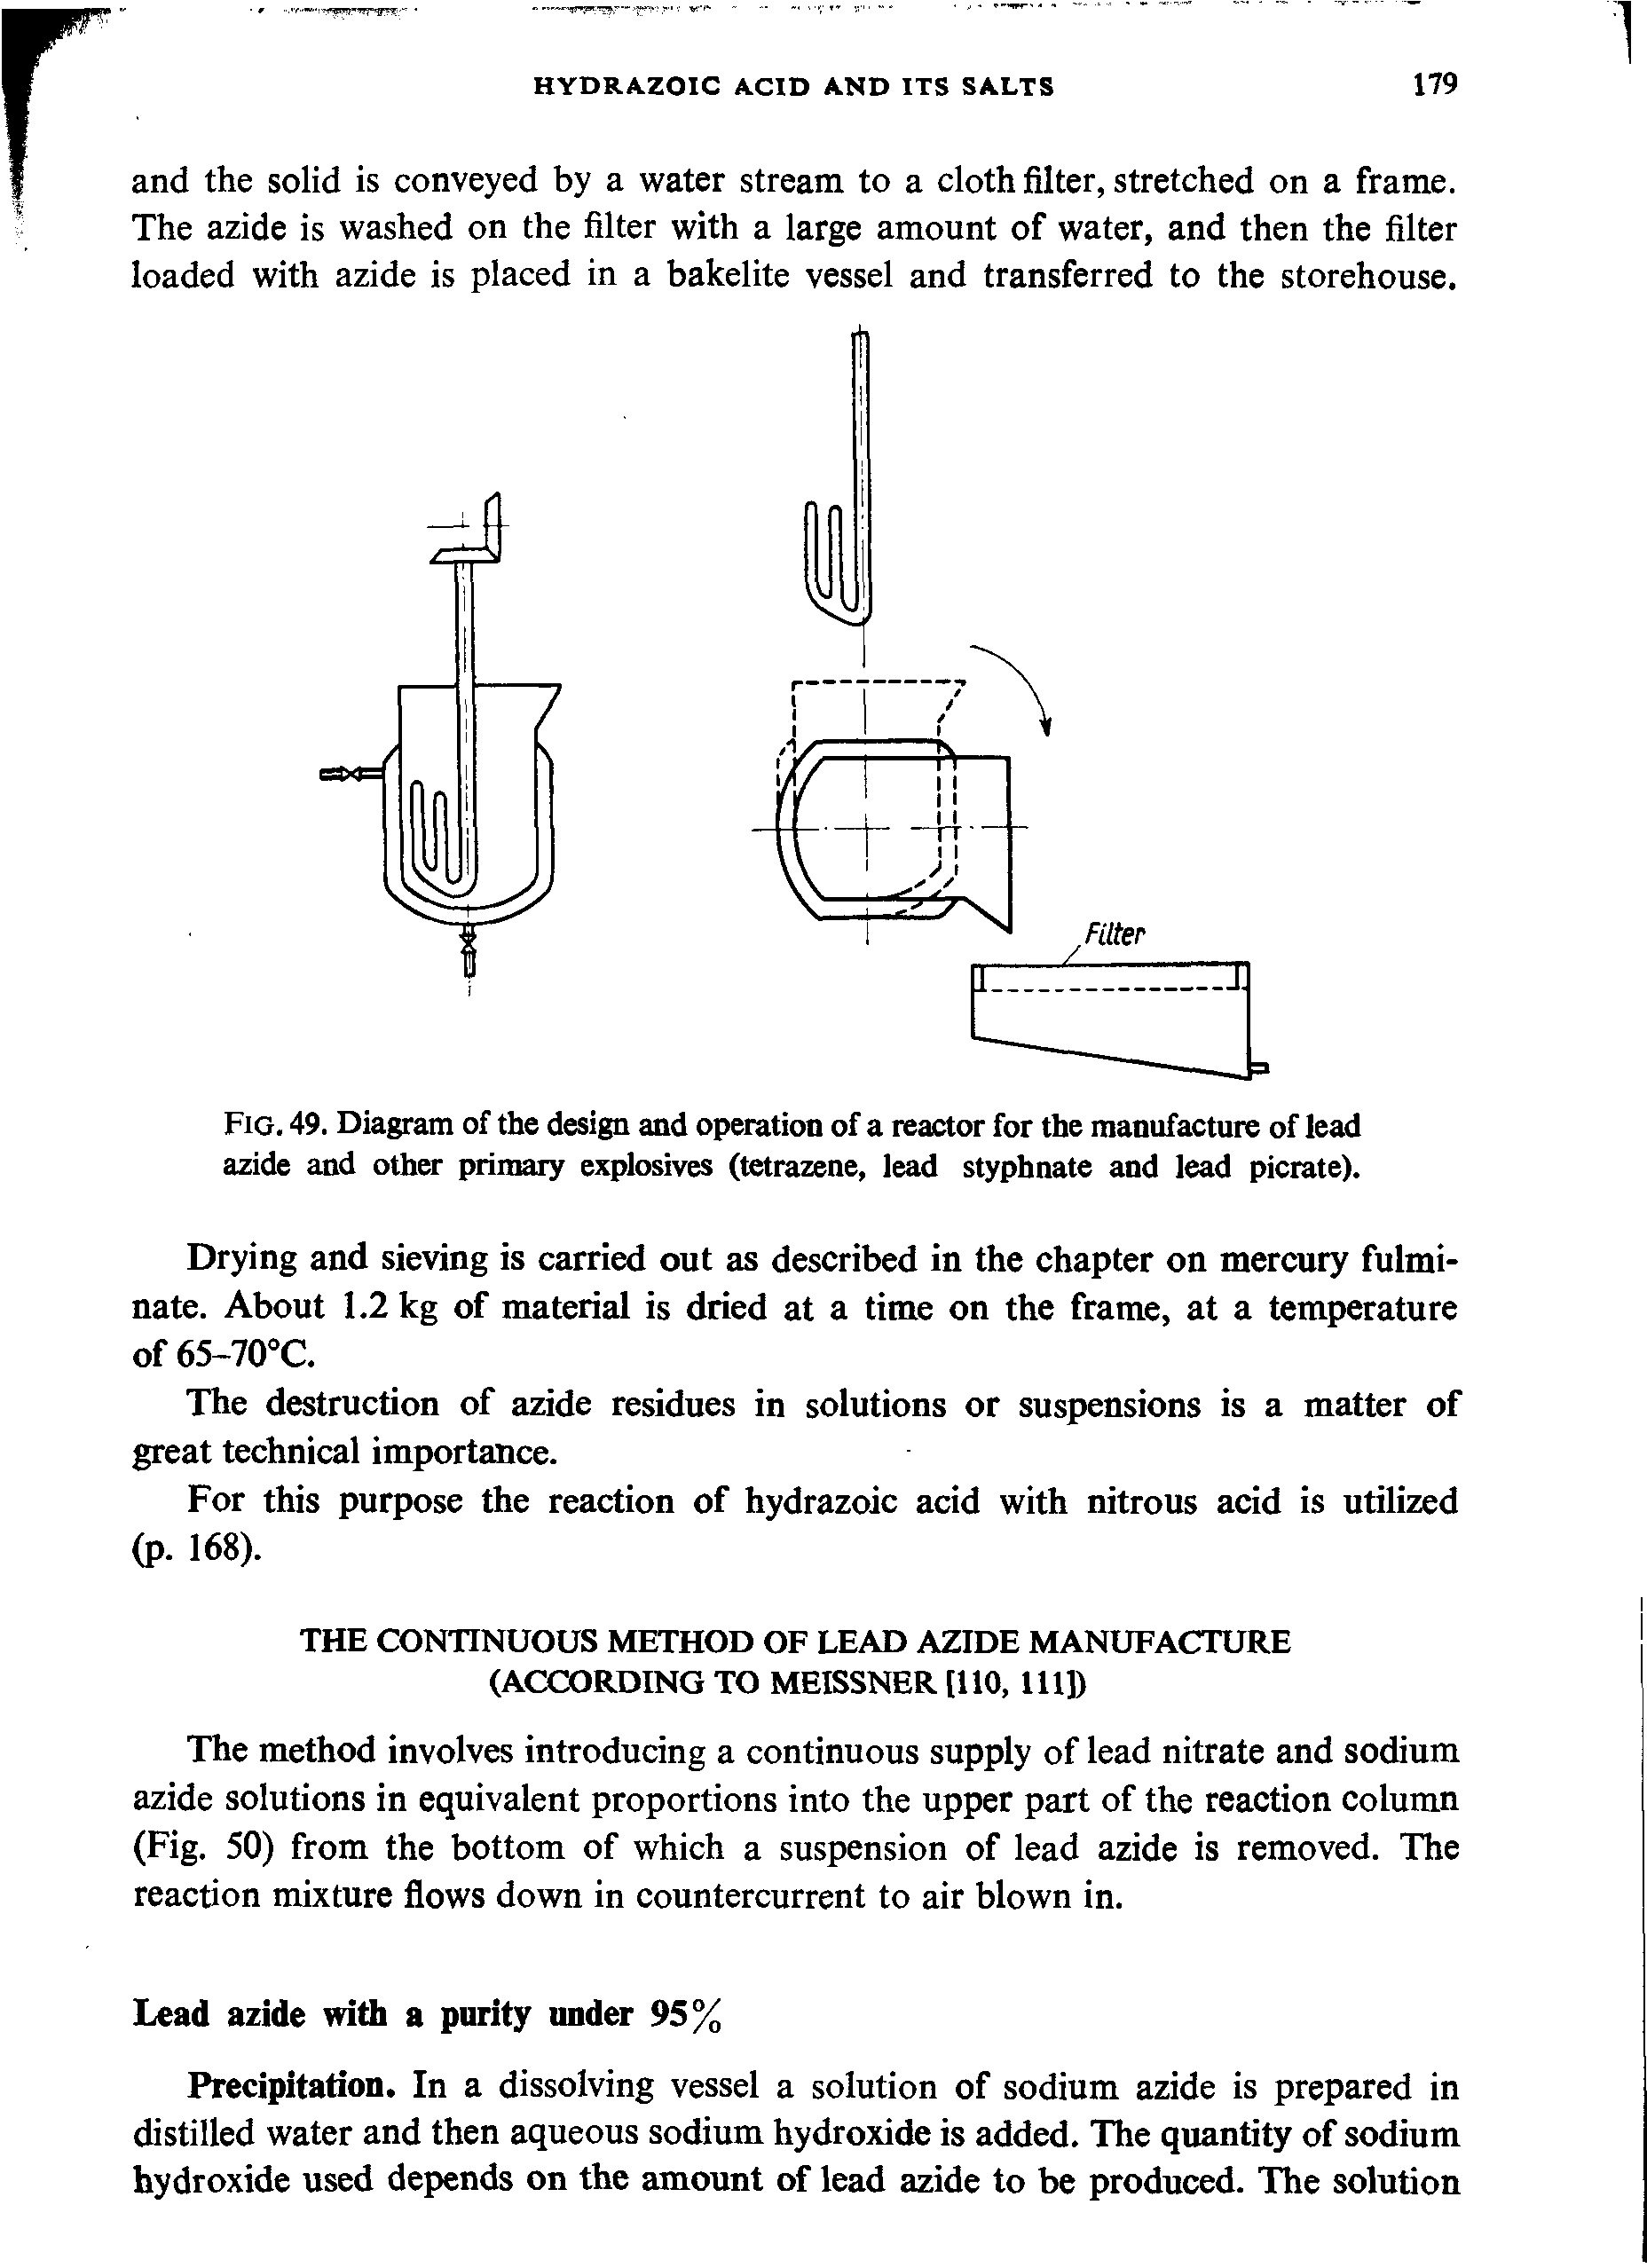 Fig. 49. Diagram of the design and operation of a reactor for the manufacture of lead azide and other primary explosives (tetrazene, lead styphnate and lead picrate).